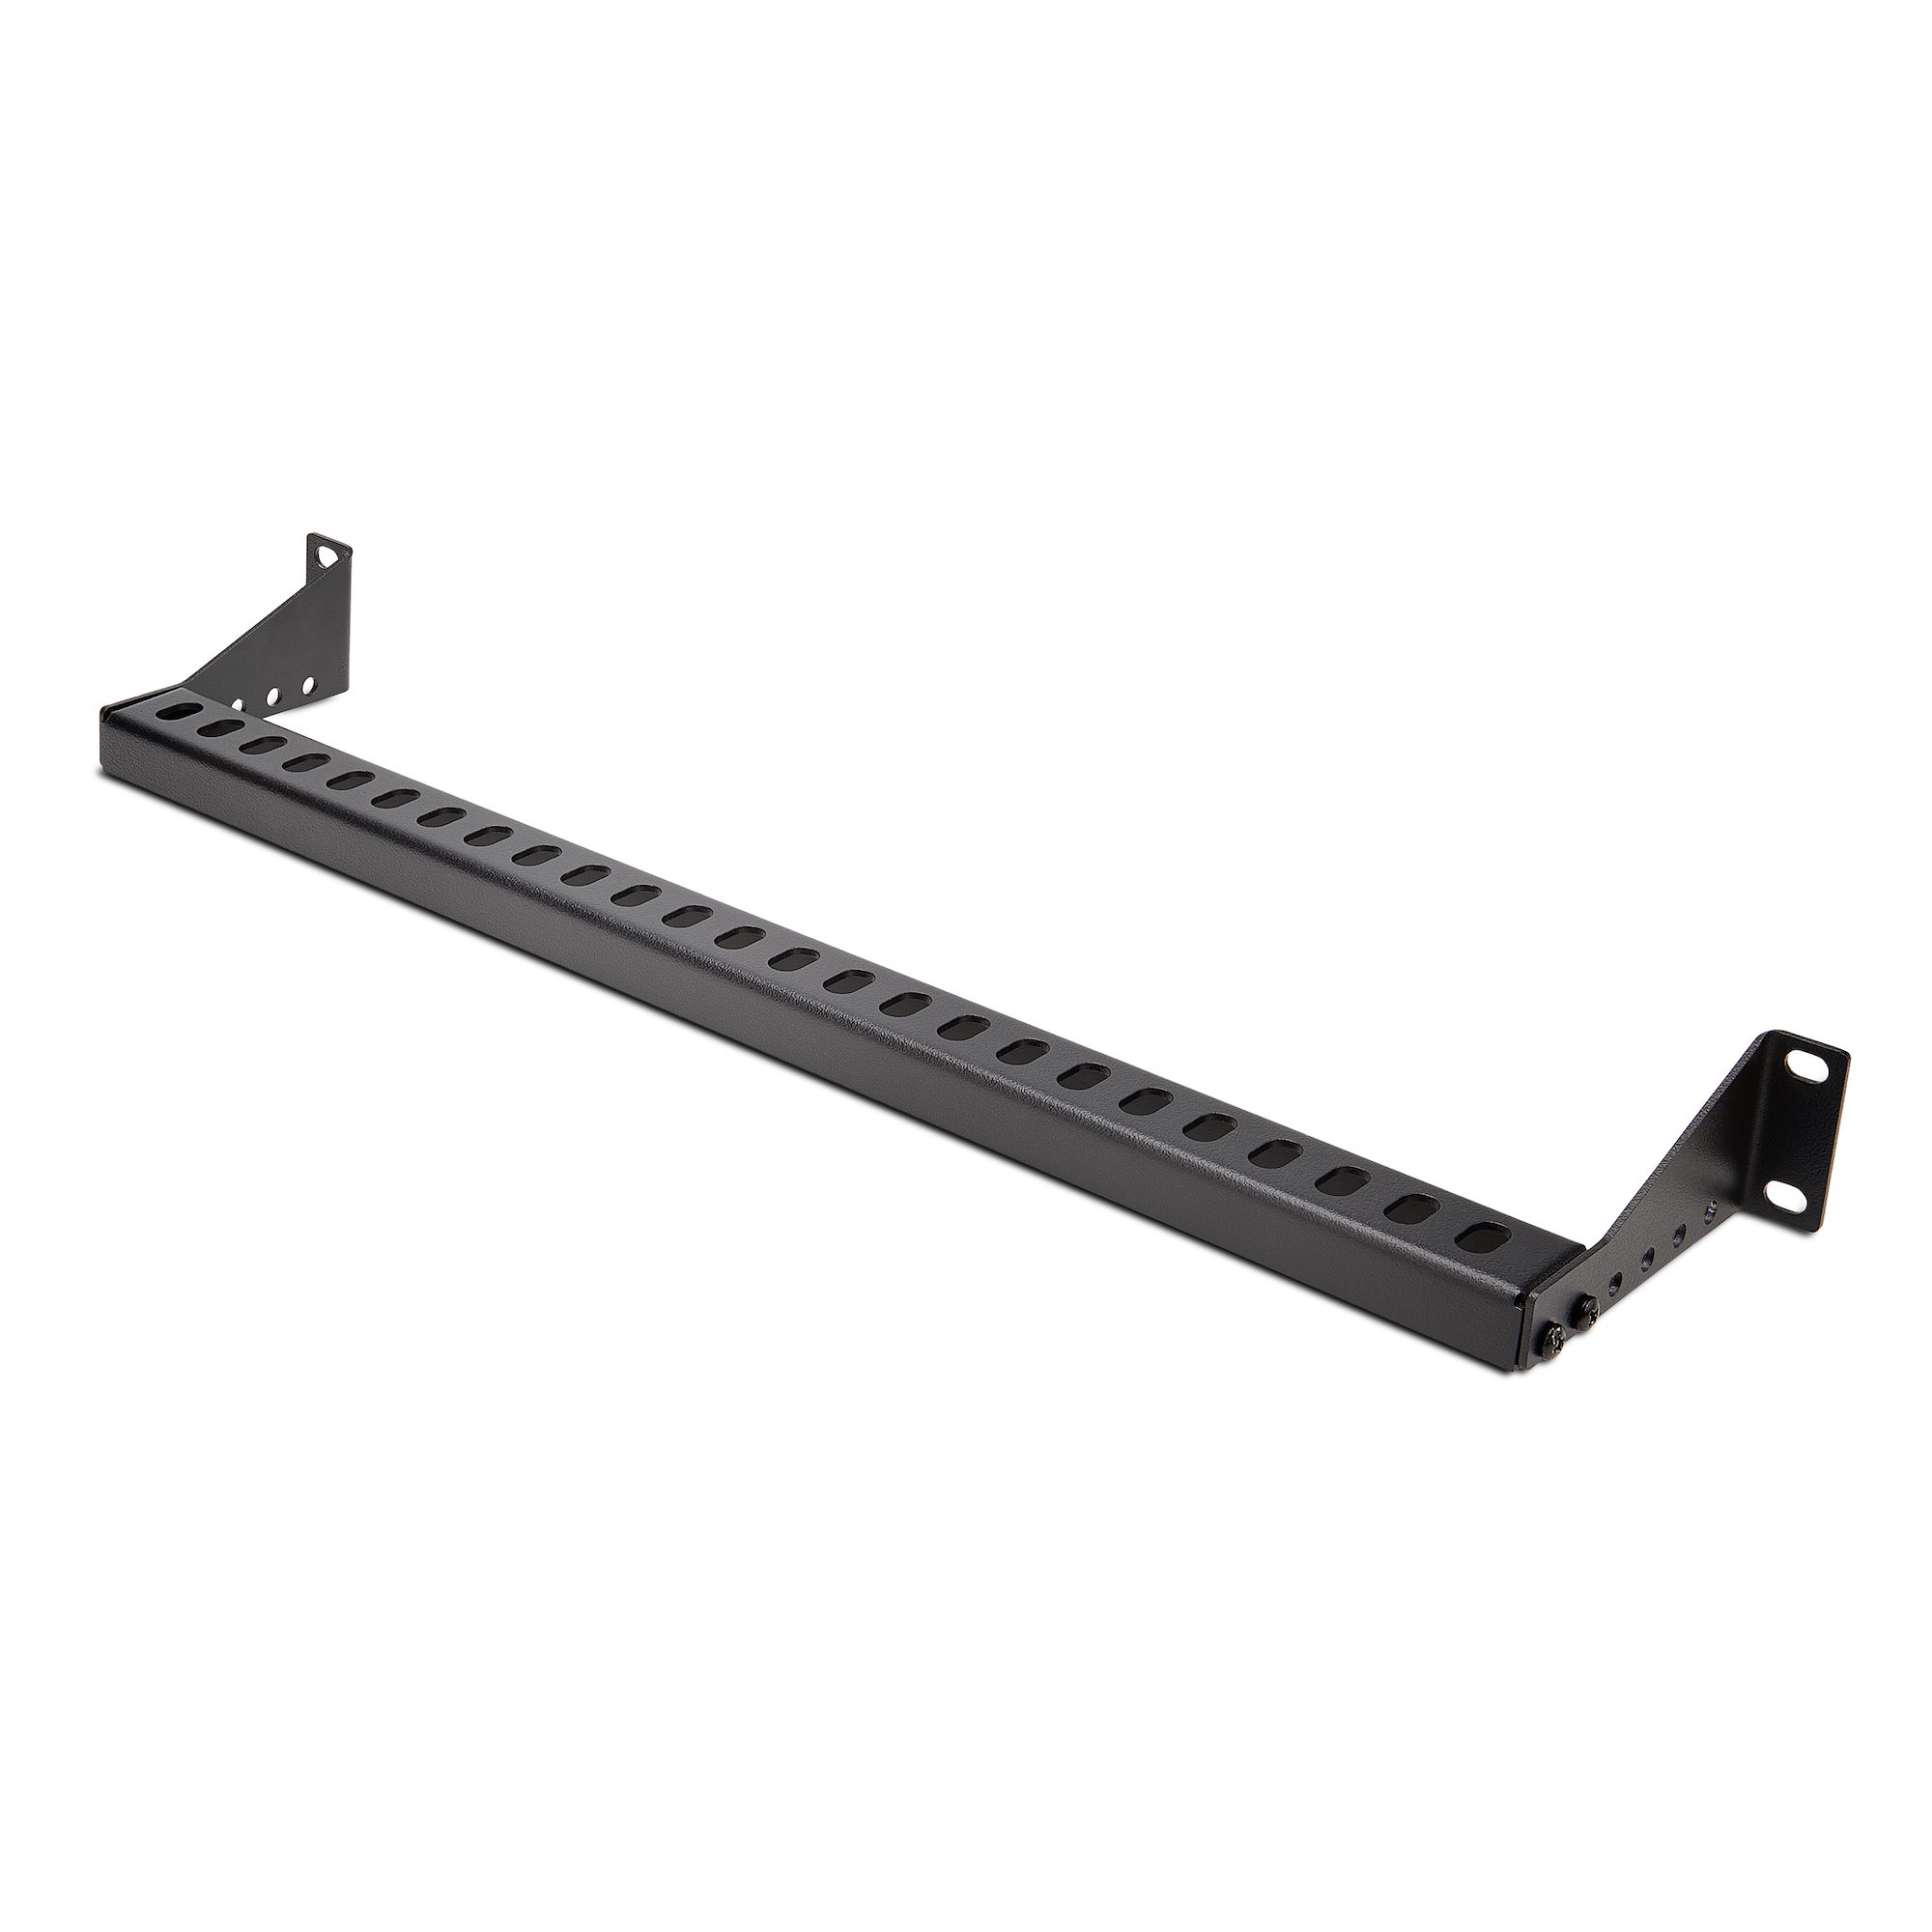 【12S-CABLE-LACING-BAR】1U RACK-MOUNT CABLE LACING BAR